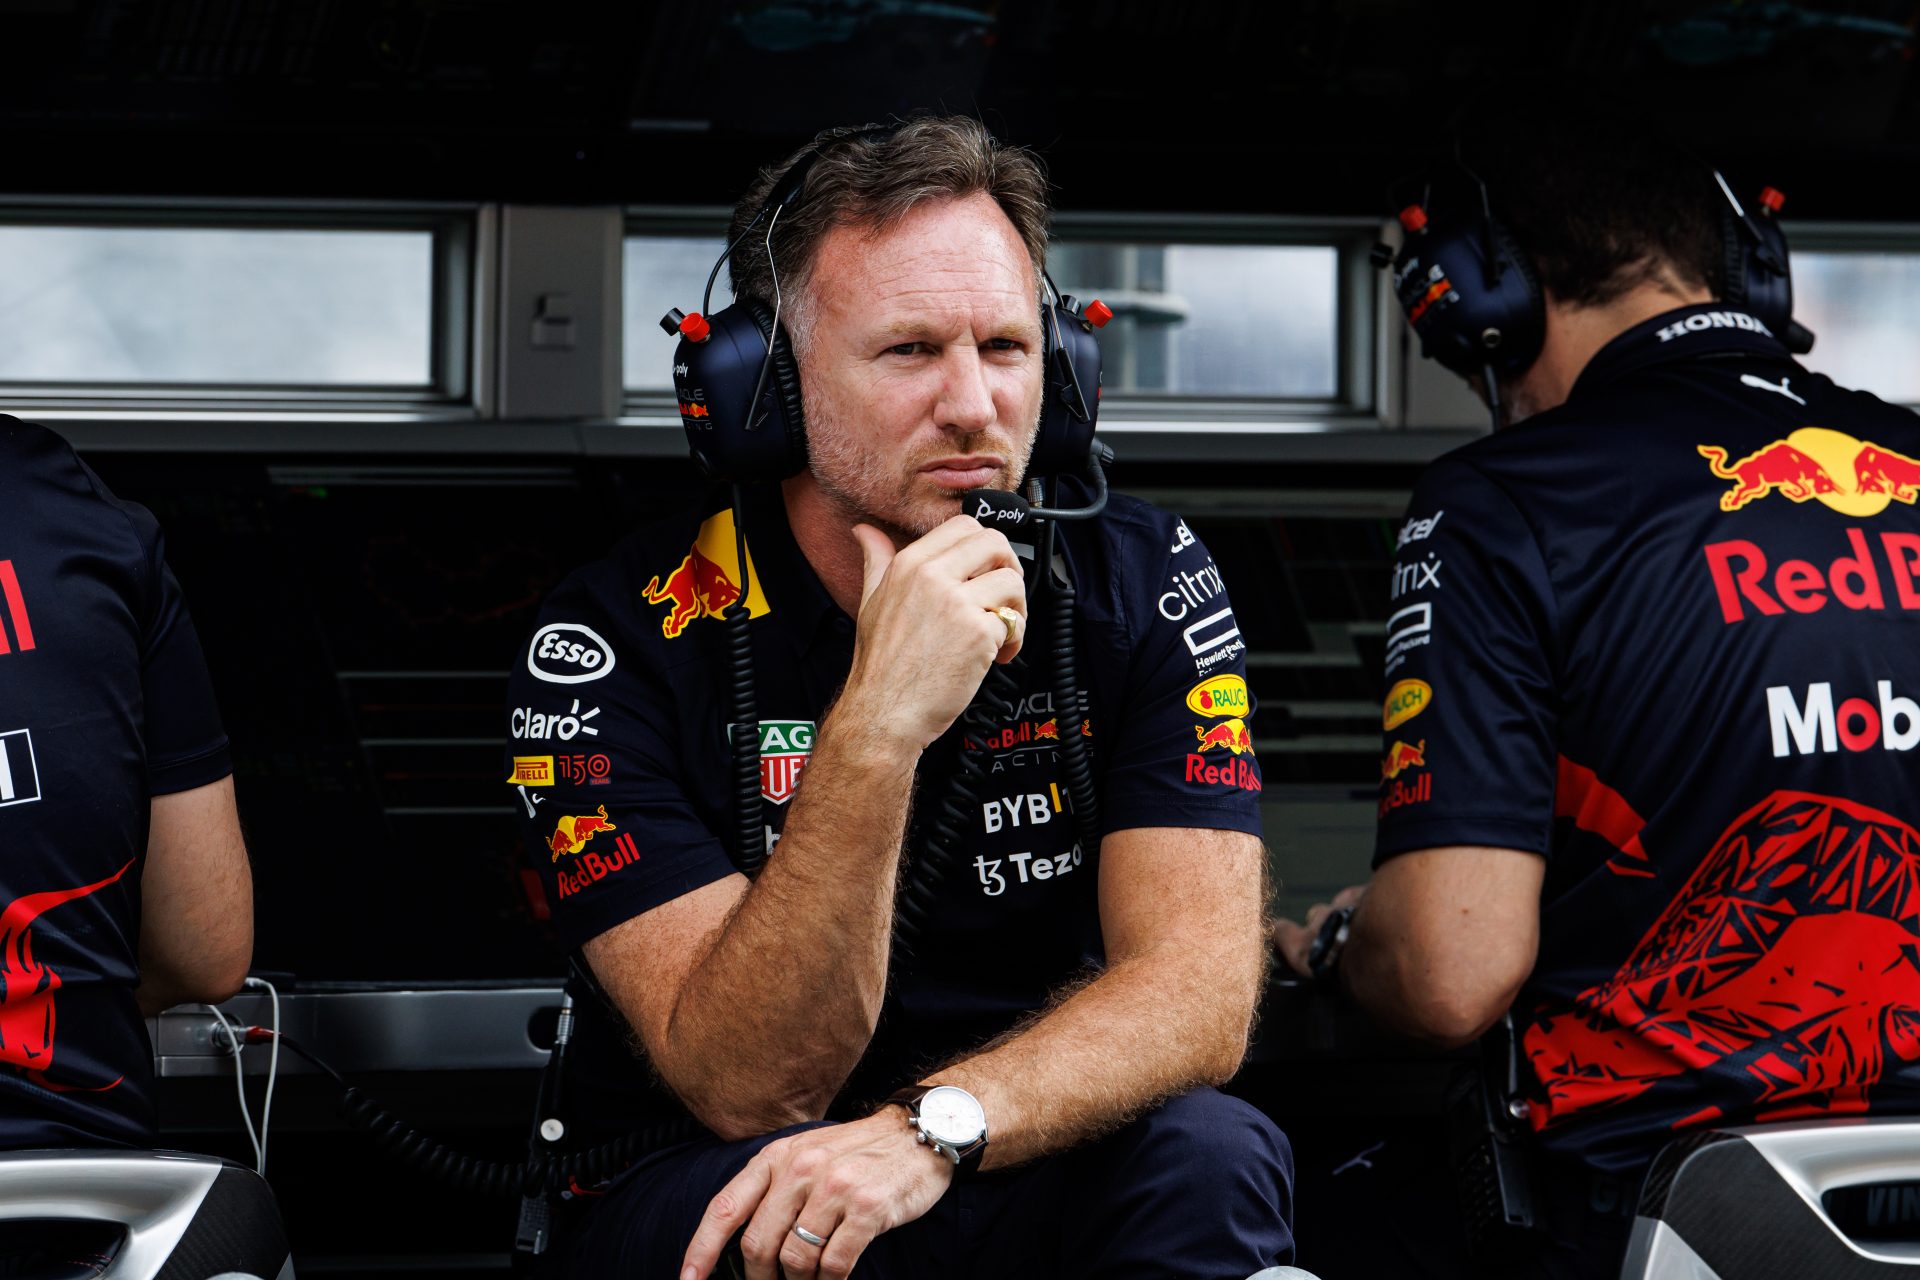 Horner says allegations are ‘nuts’